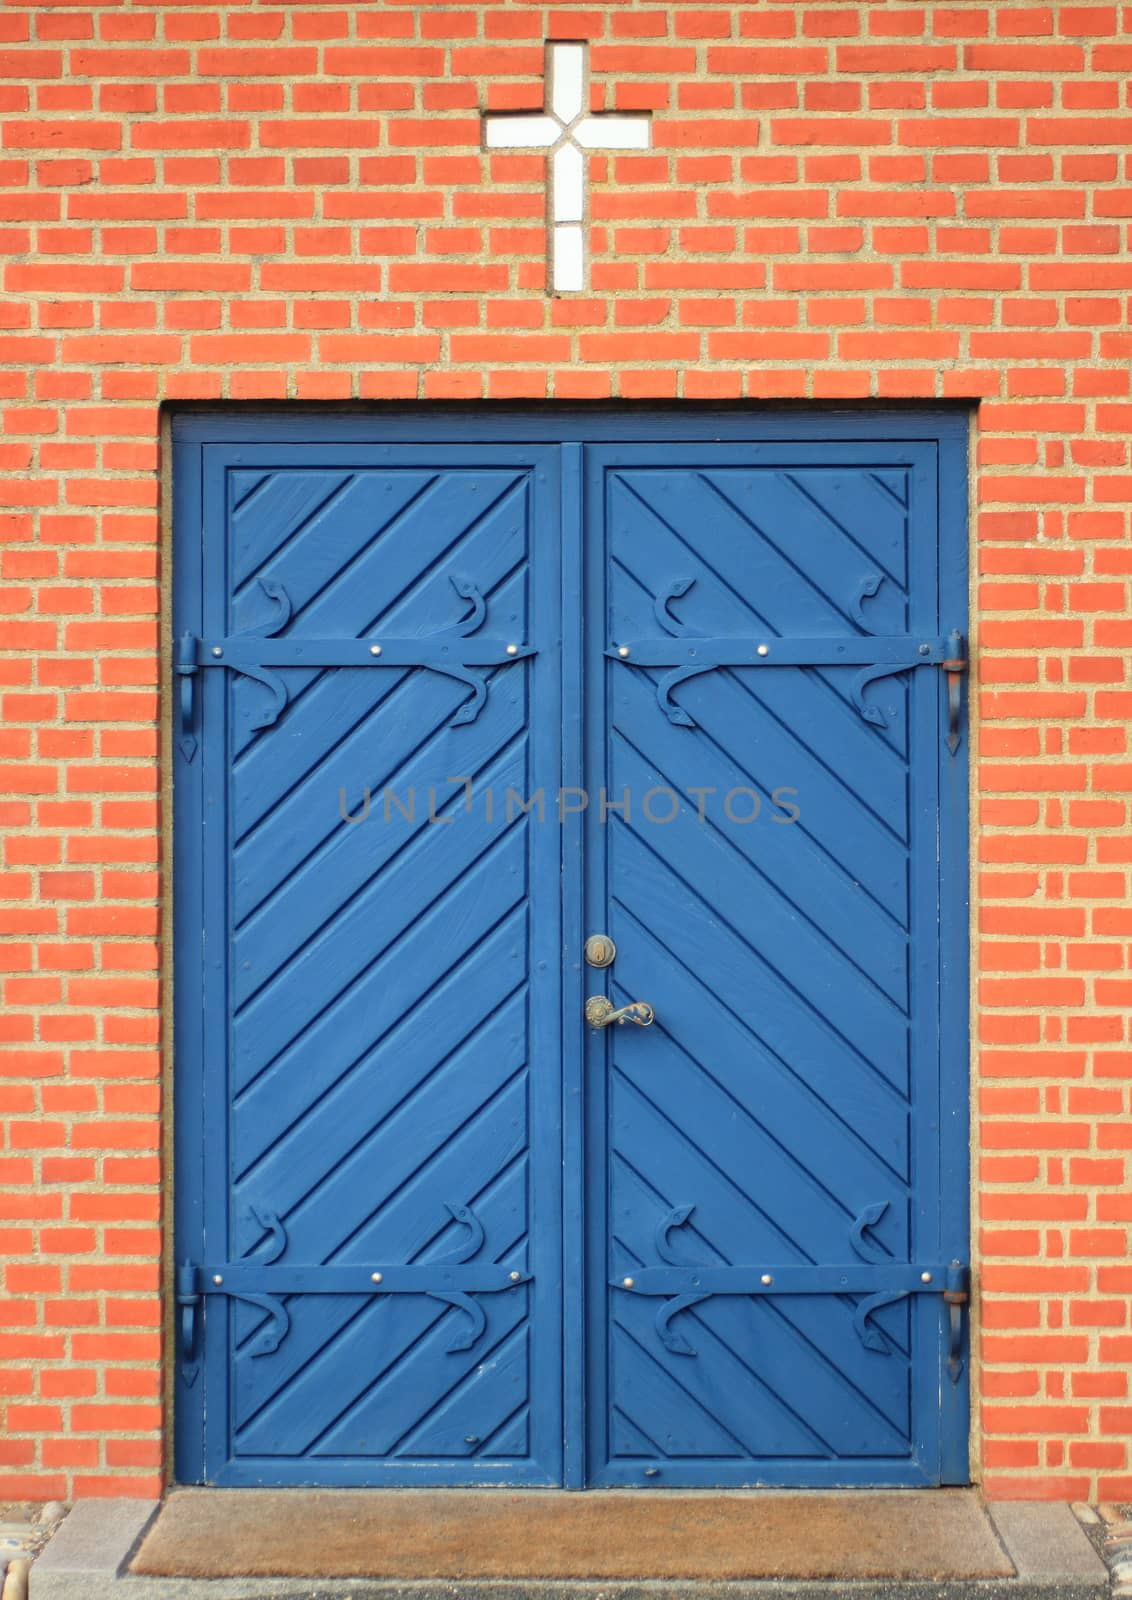 Isolated entrance to church with blue doors and white cross